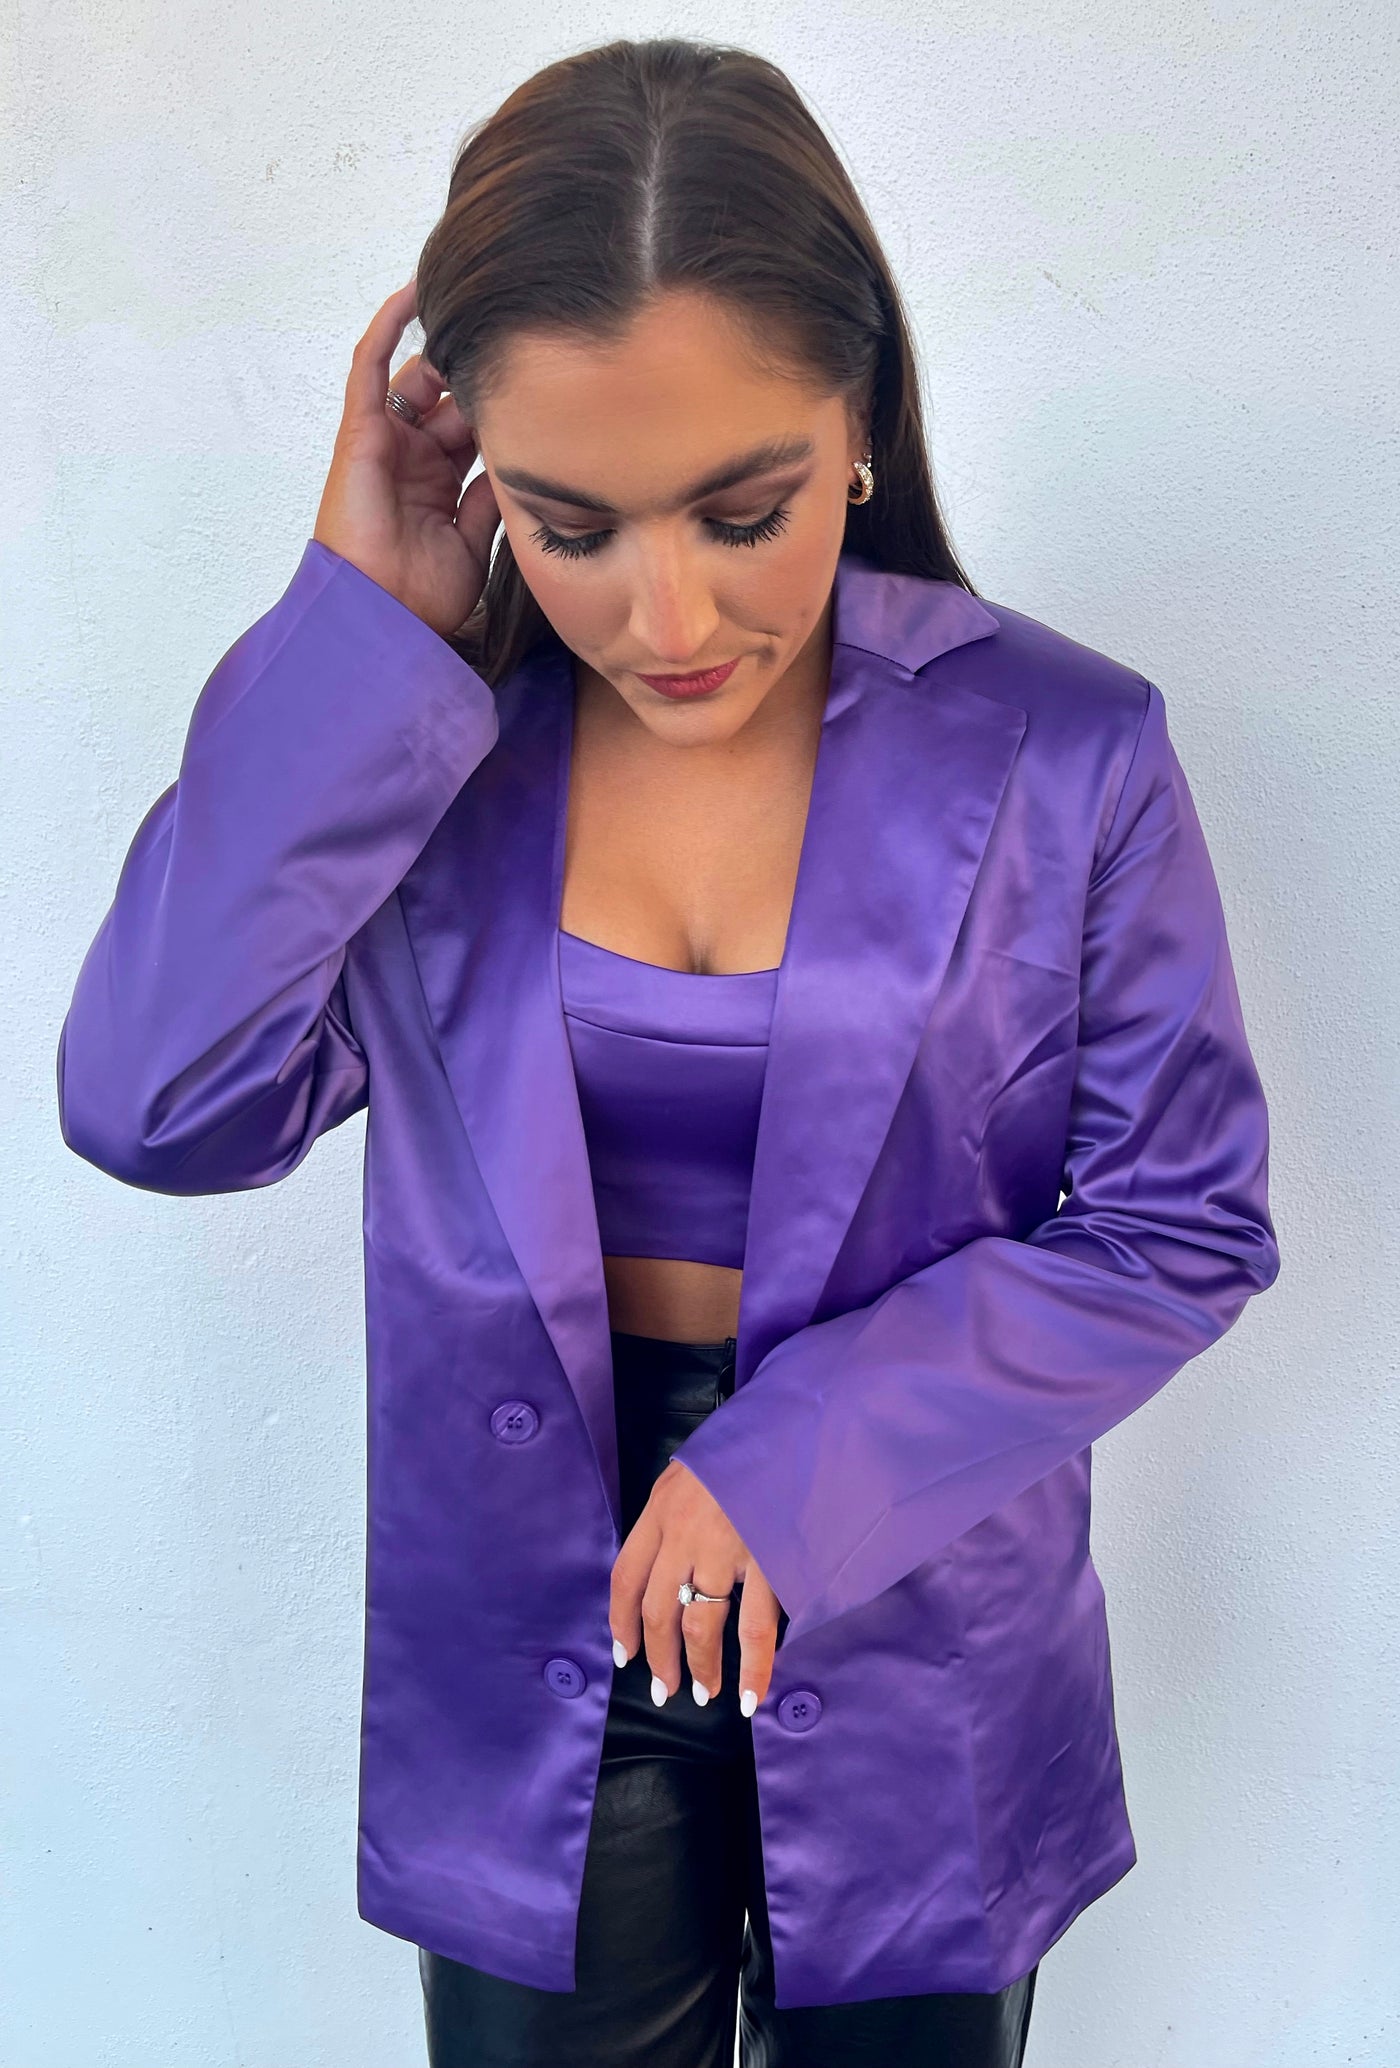 The Lila Blazer Set from Shop Silvs is a purple crop top with matching blazer that will add some glam to your wardrobe.